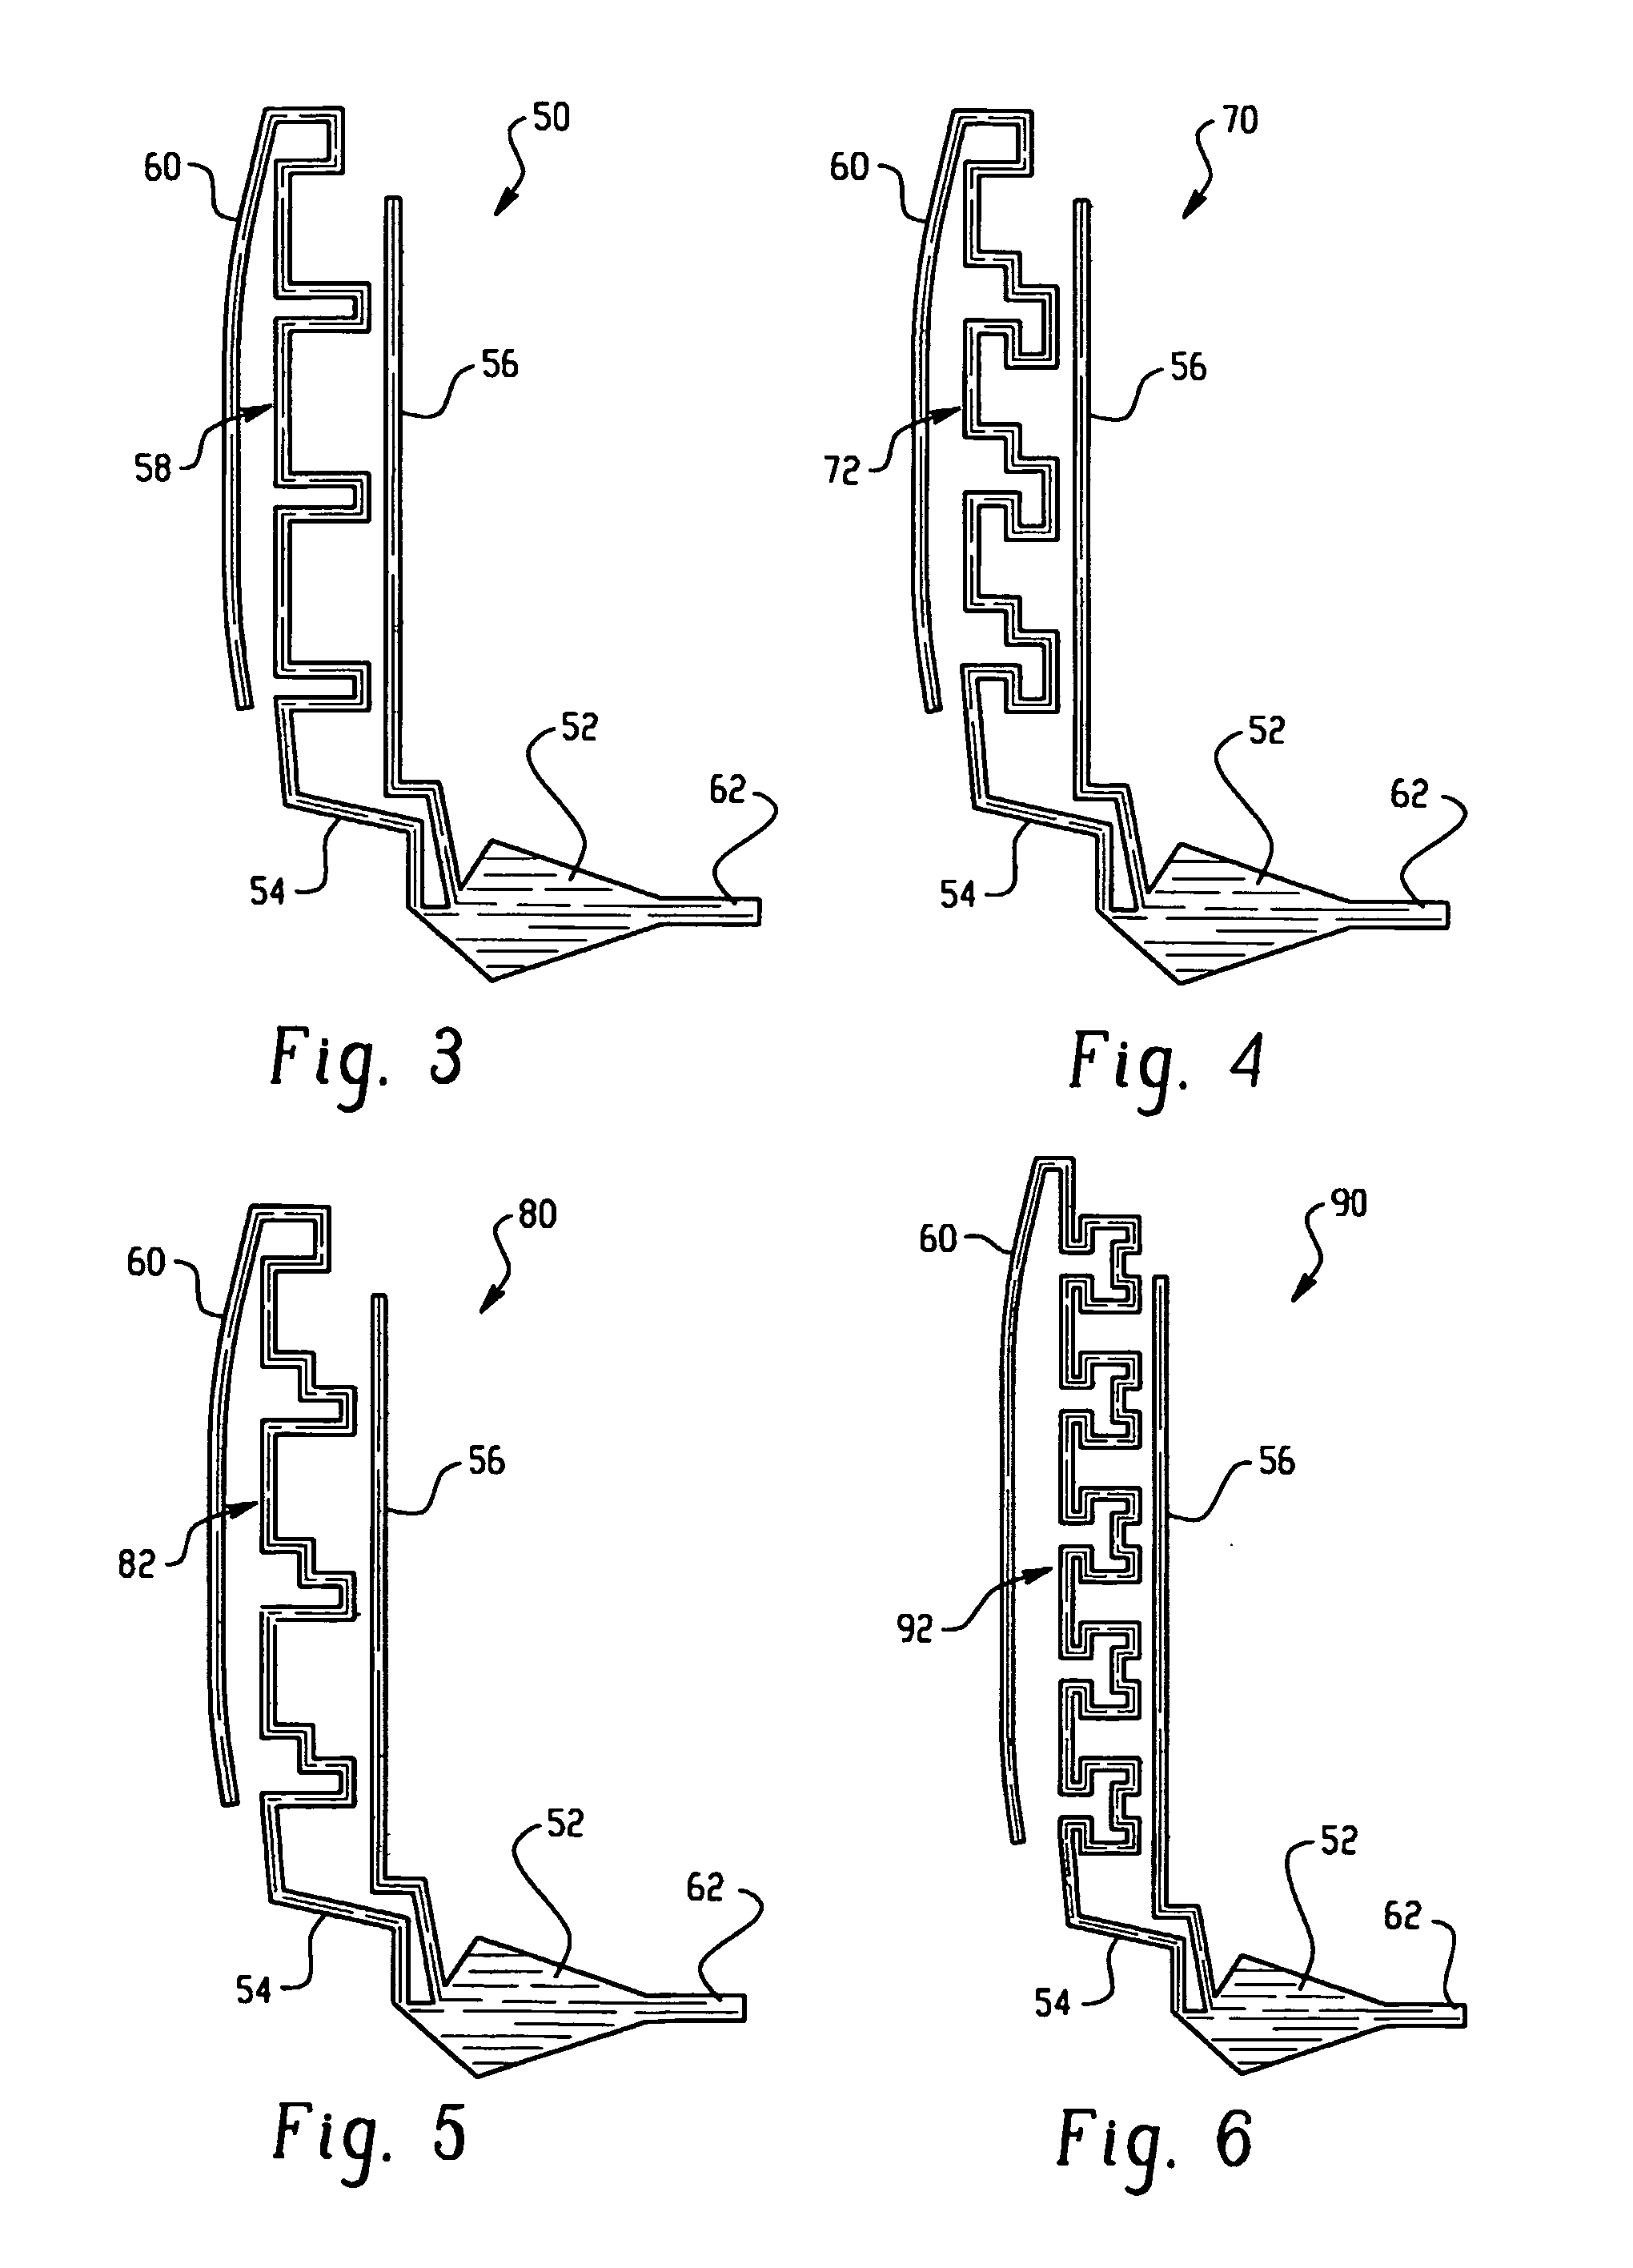 Multi-band monopole antennas for mobile communications devices